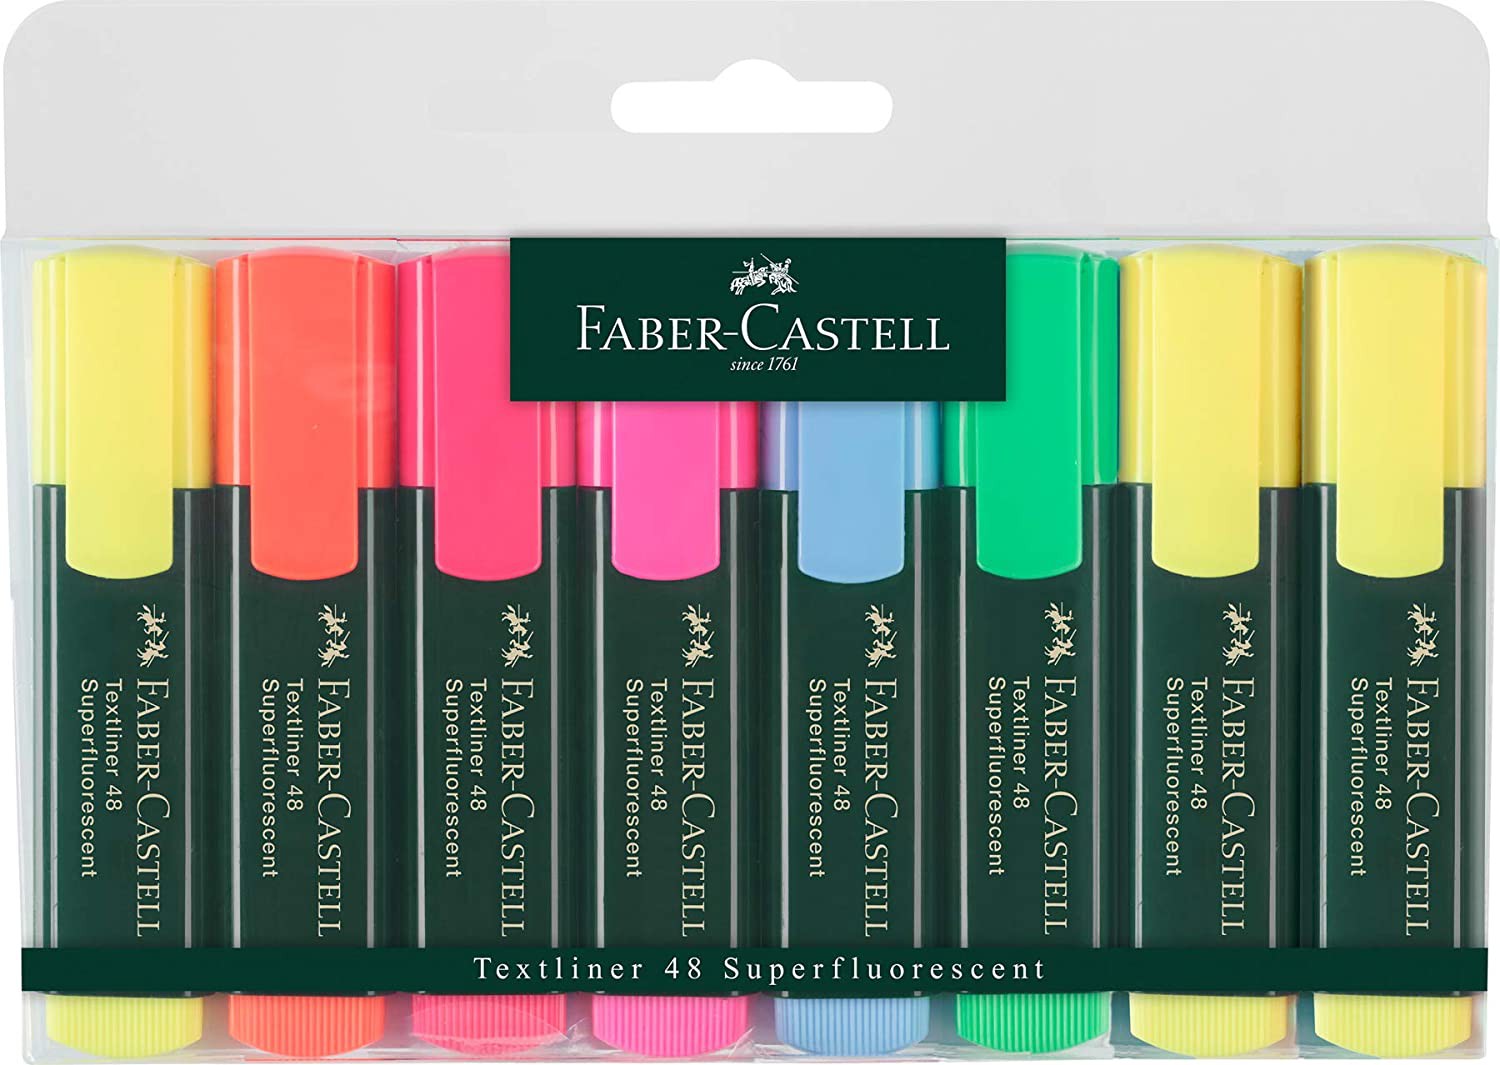 Faber-Castell+48+Assorted+Textliner+Wallet+of+6+%2B+2+Free